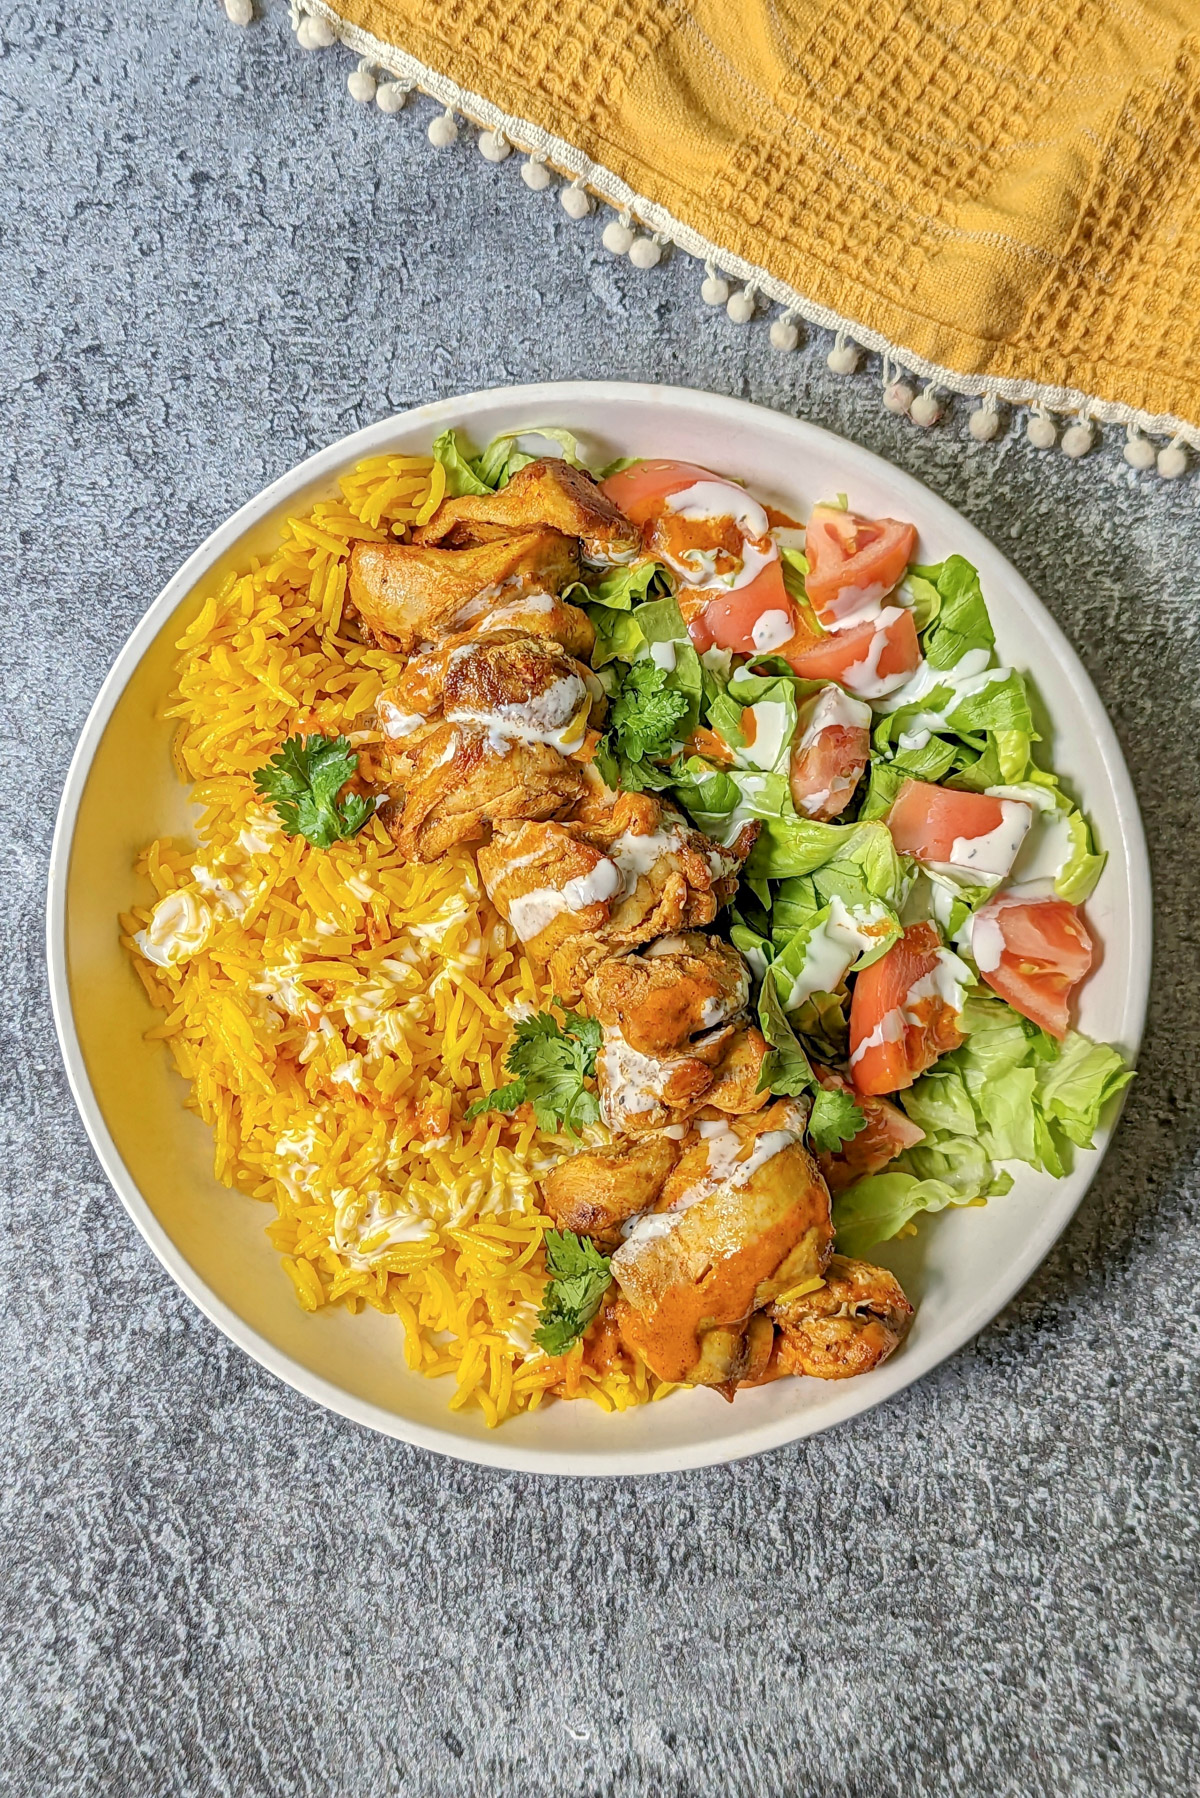 Halal chicken with rice and a salad.